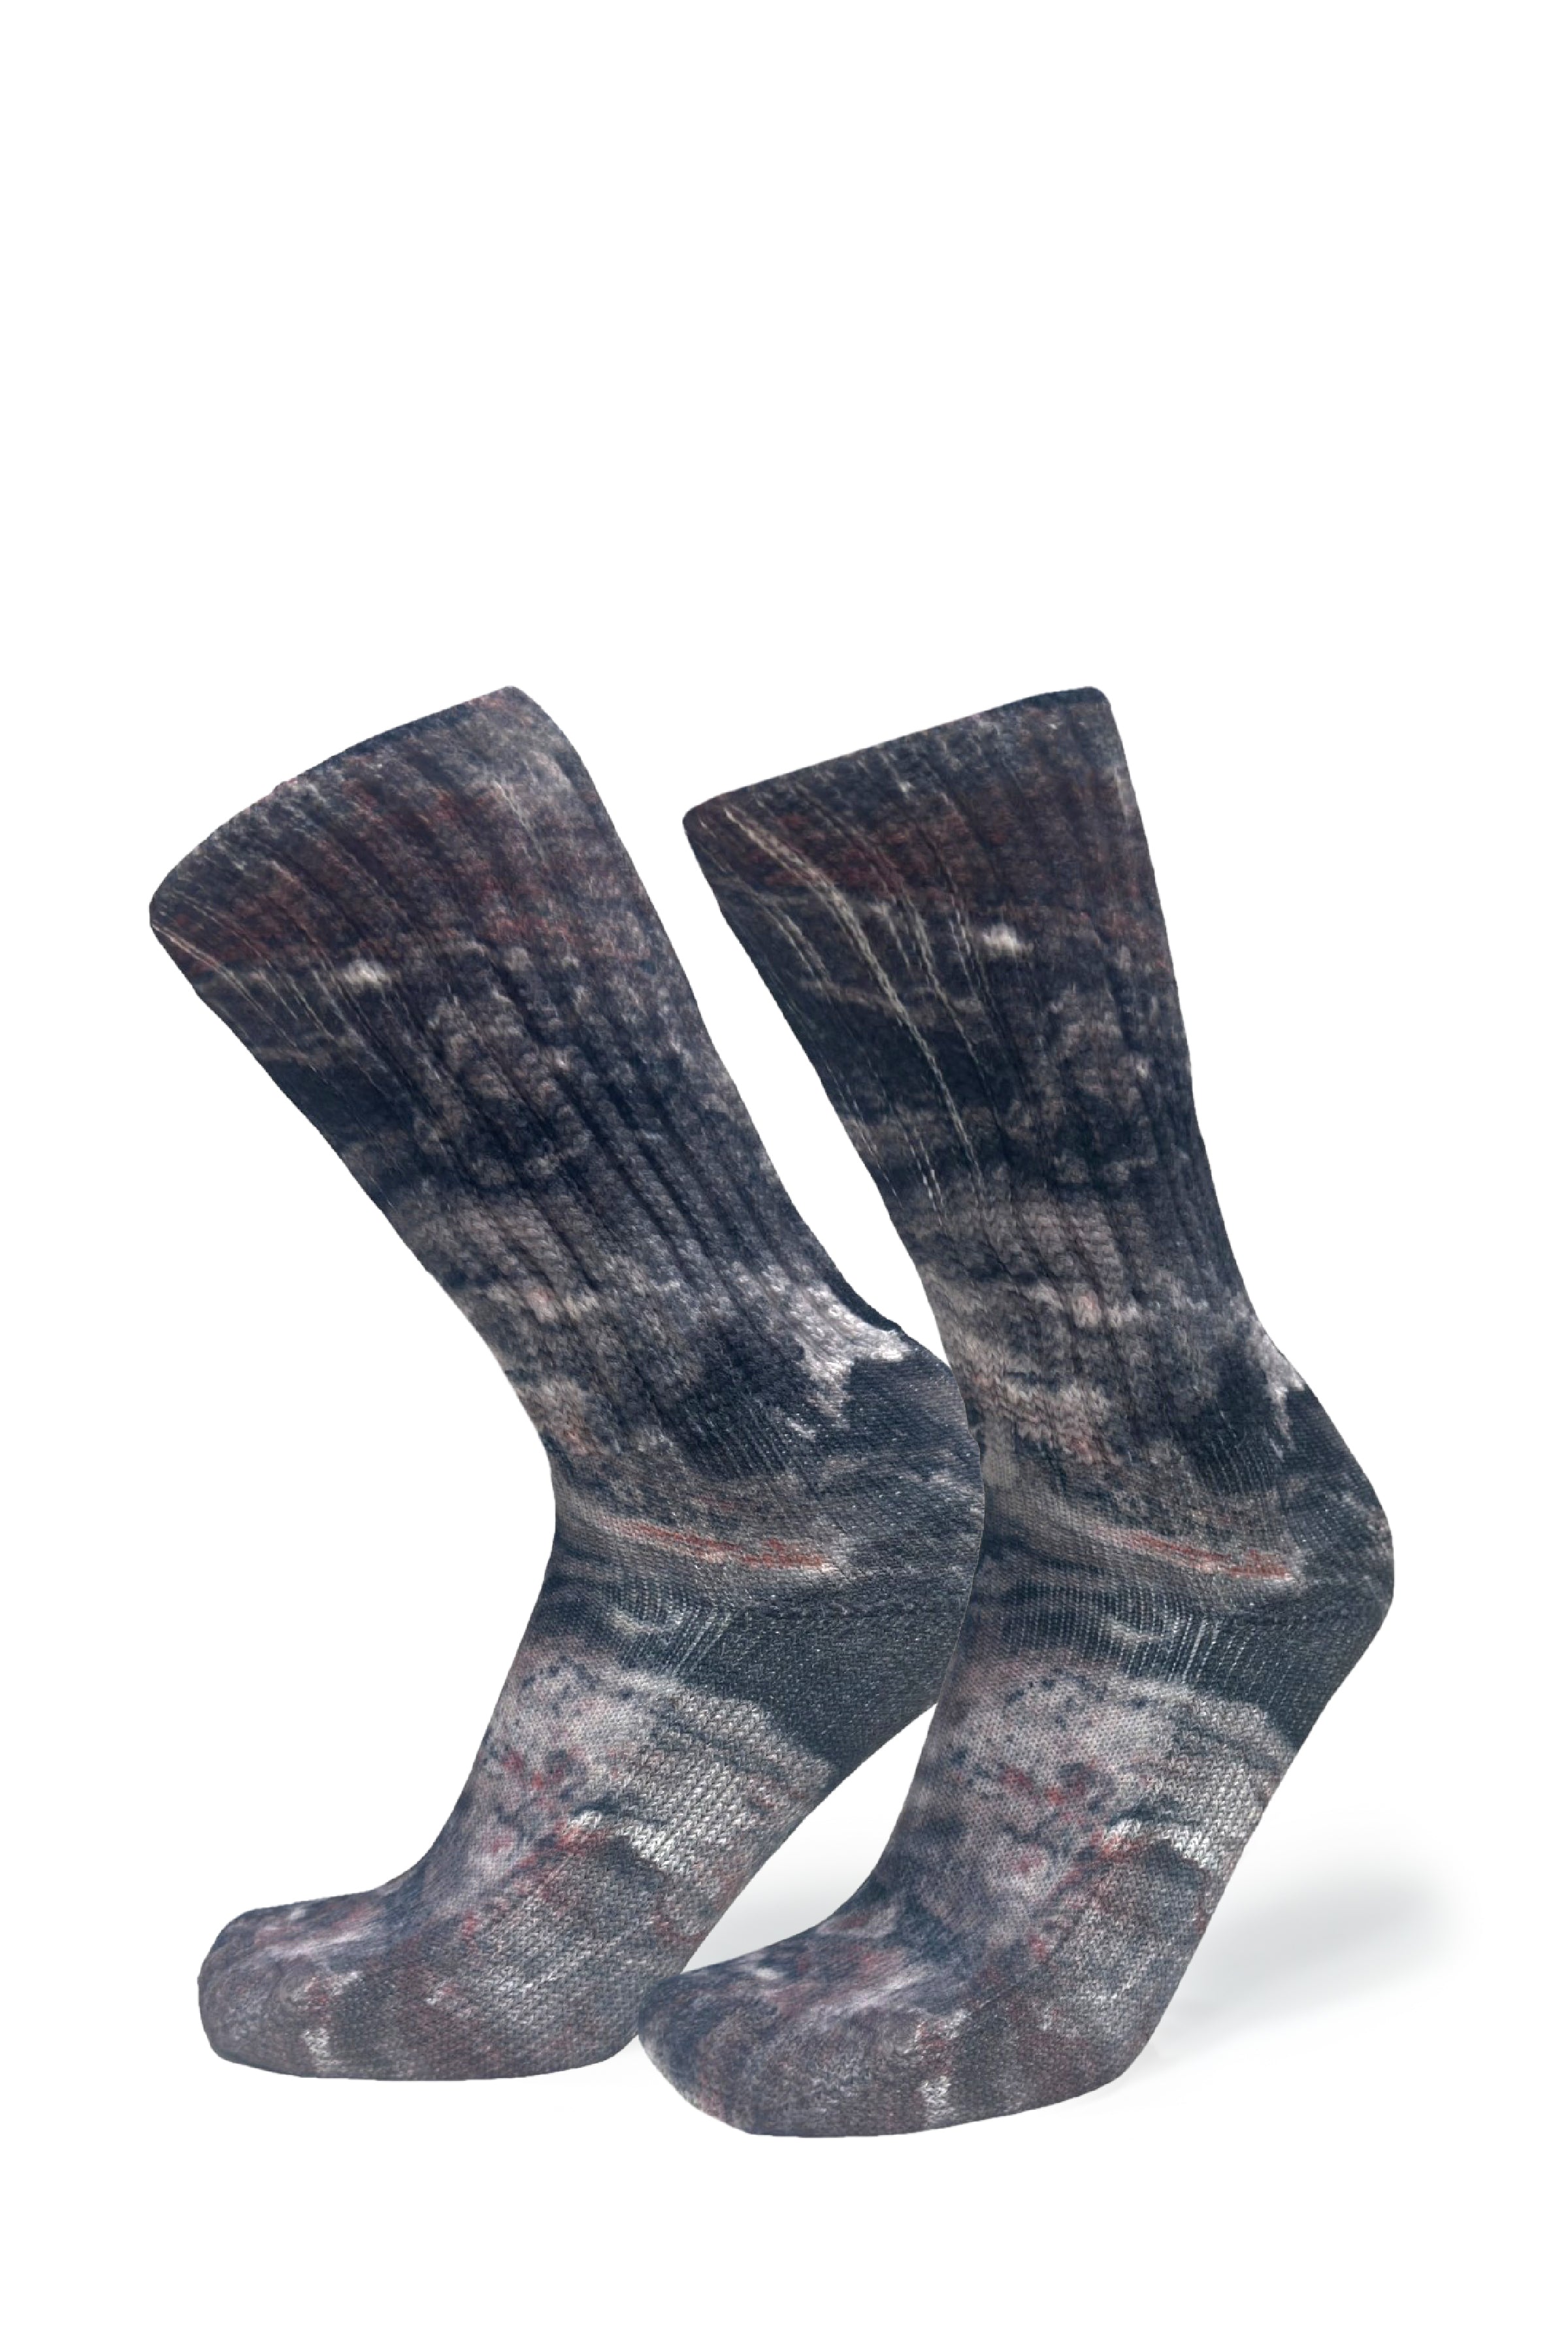 Cozy Diabetic Comfort Relax Fit Marbled Stone Socks